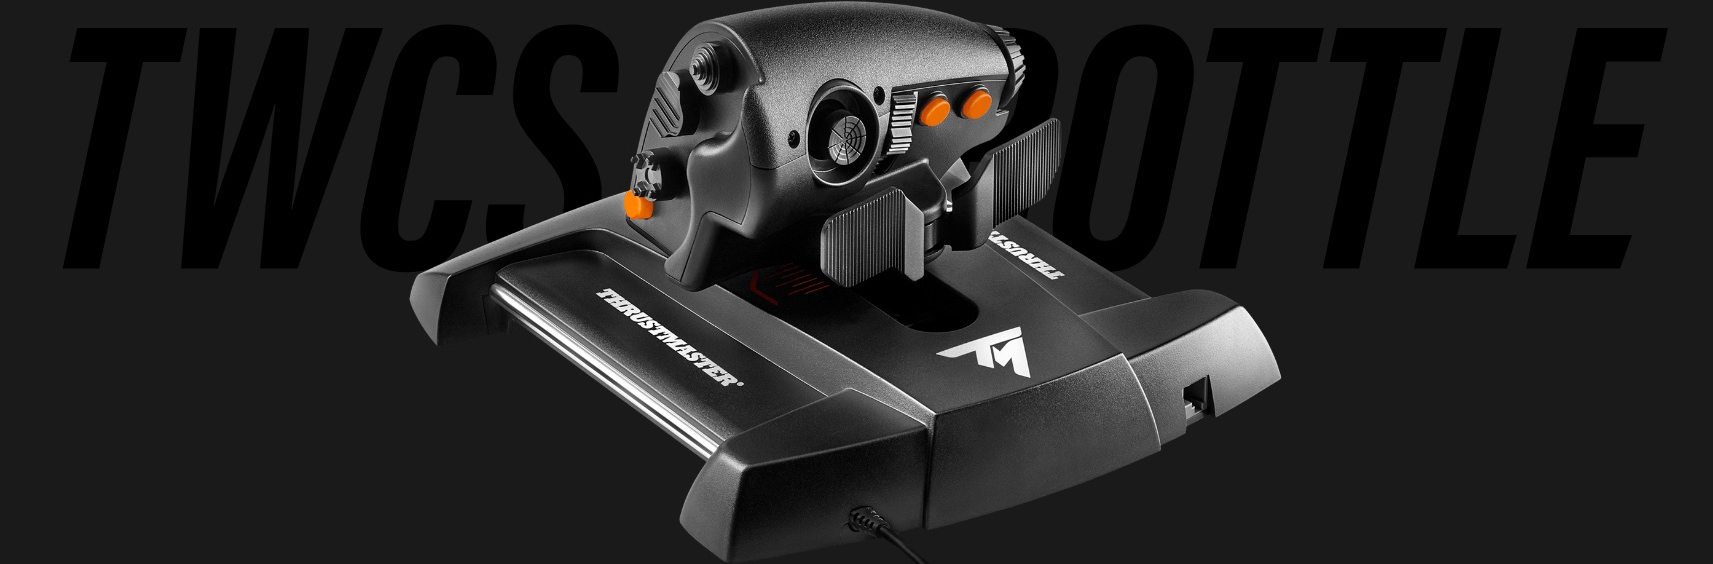 TWCS Throttle Thrustmaster Weapon Control System